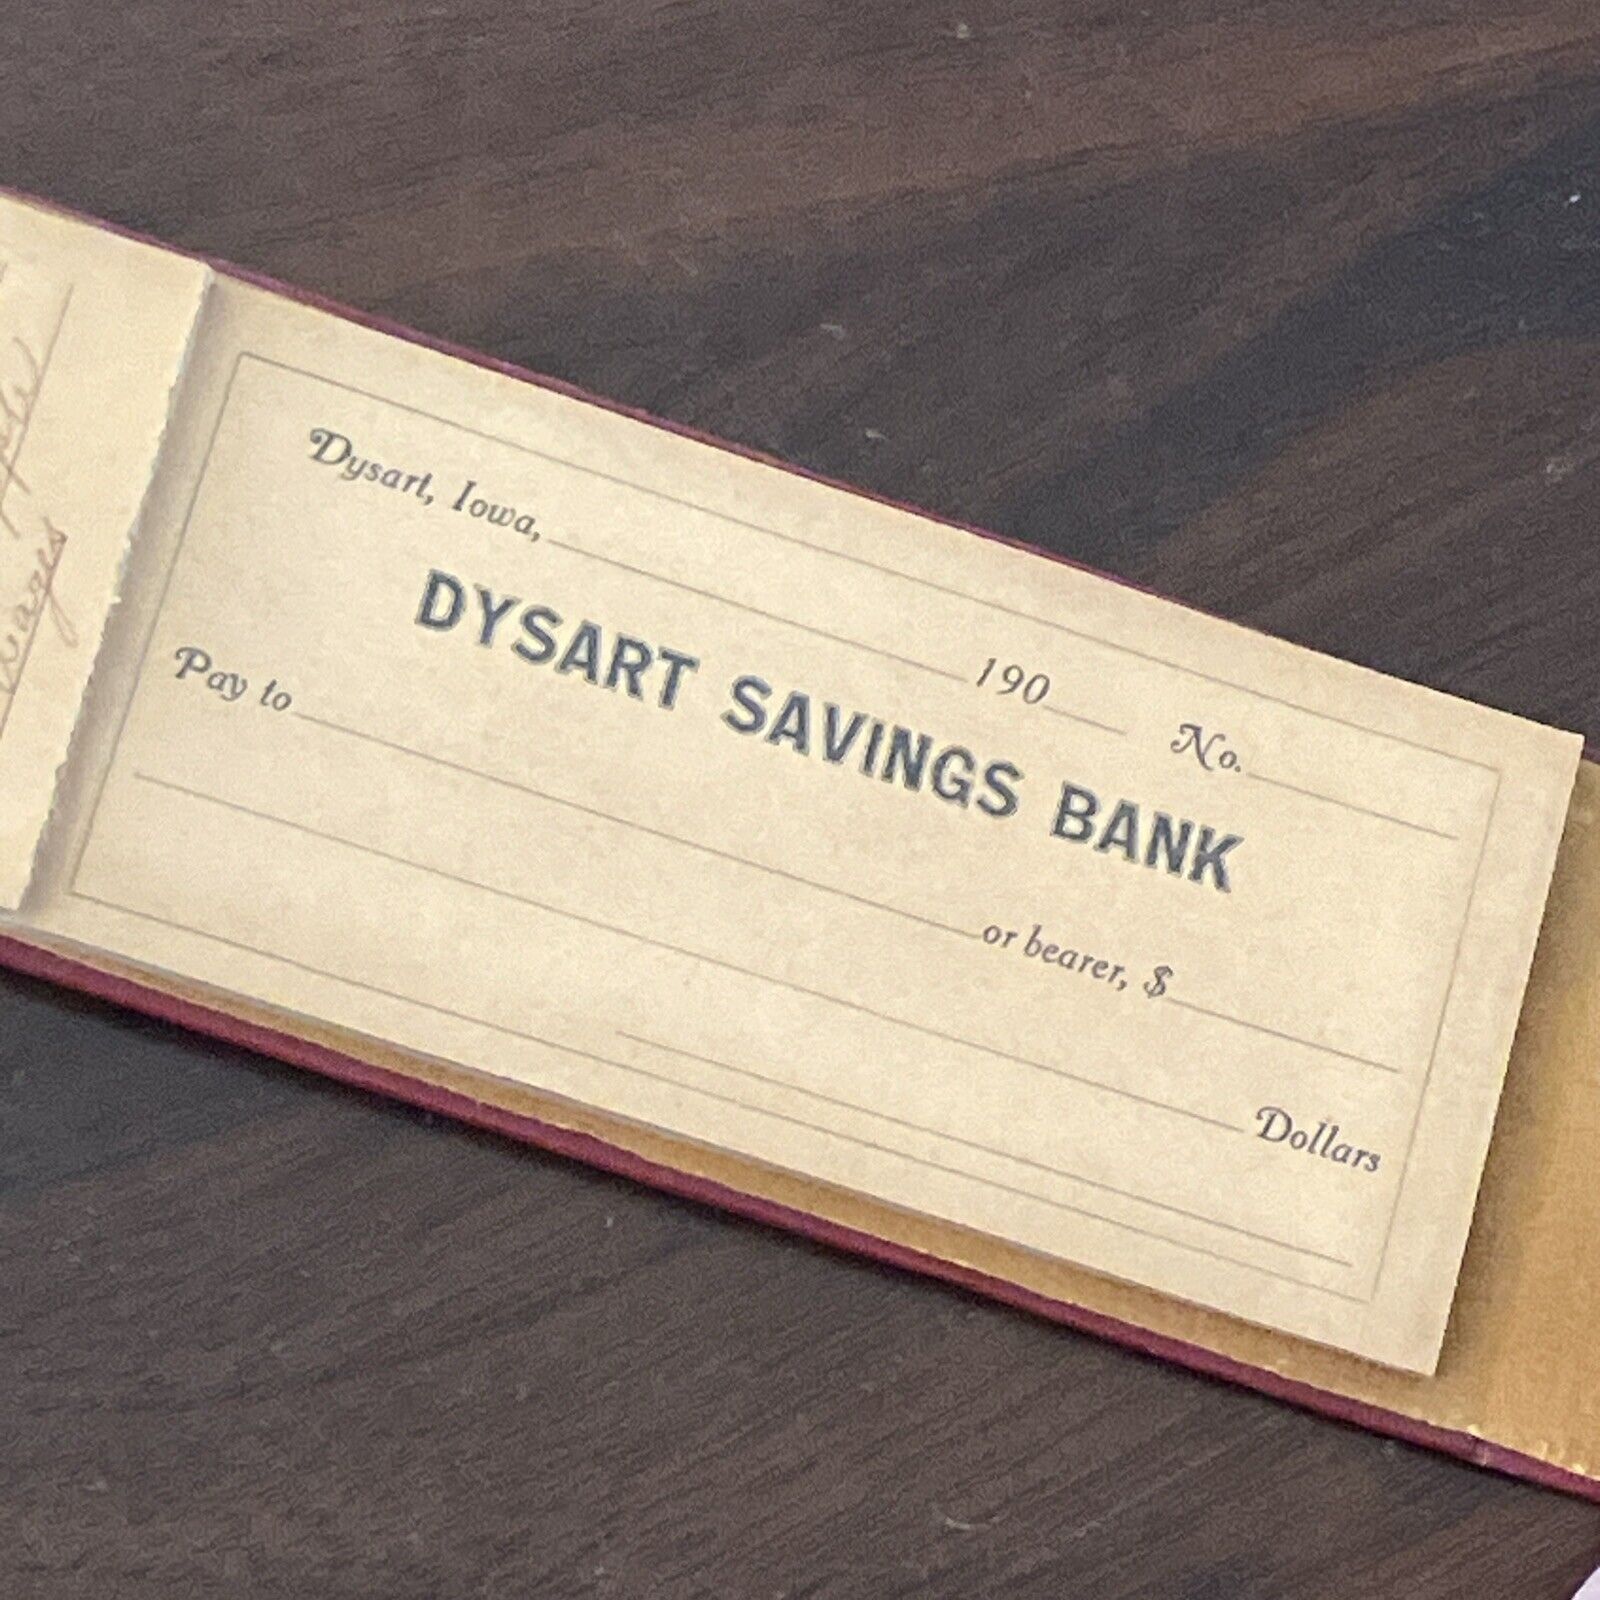 dysart savings bank iowa Old VTG Checks Uncashed Citizens State Early 20th Cnt